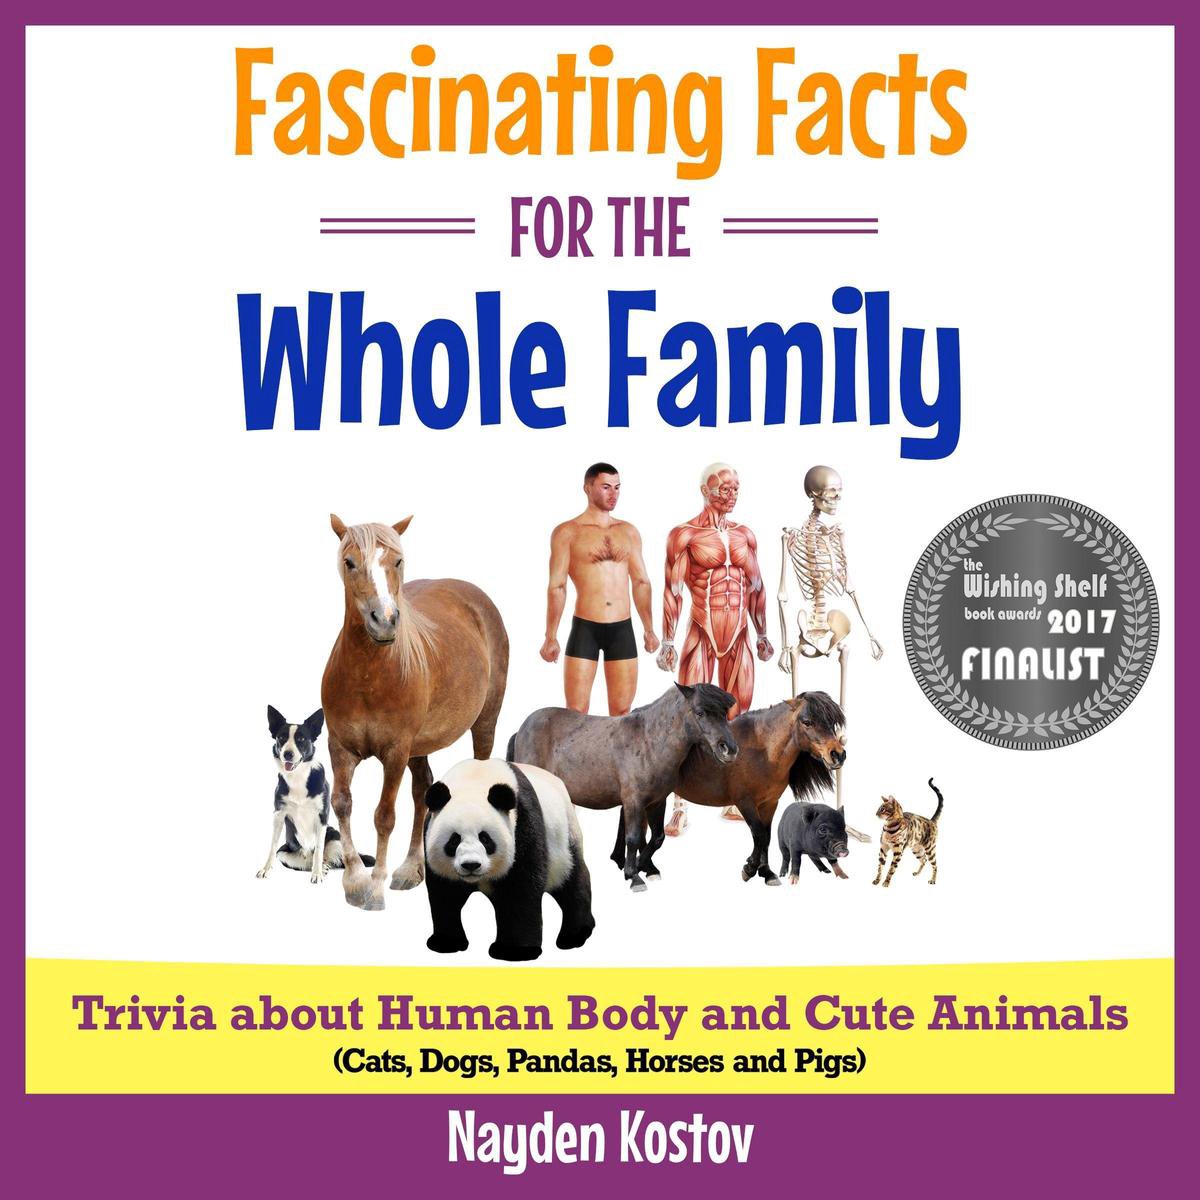 Fascinating Facts for the Whole Family - Nayden Kostov